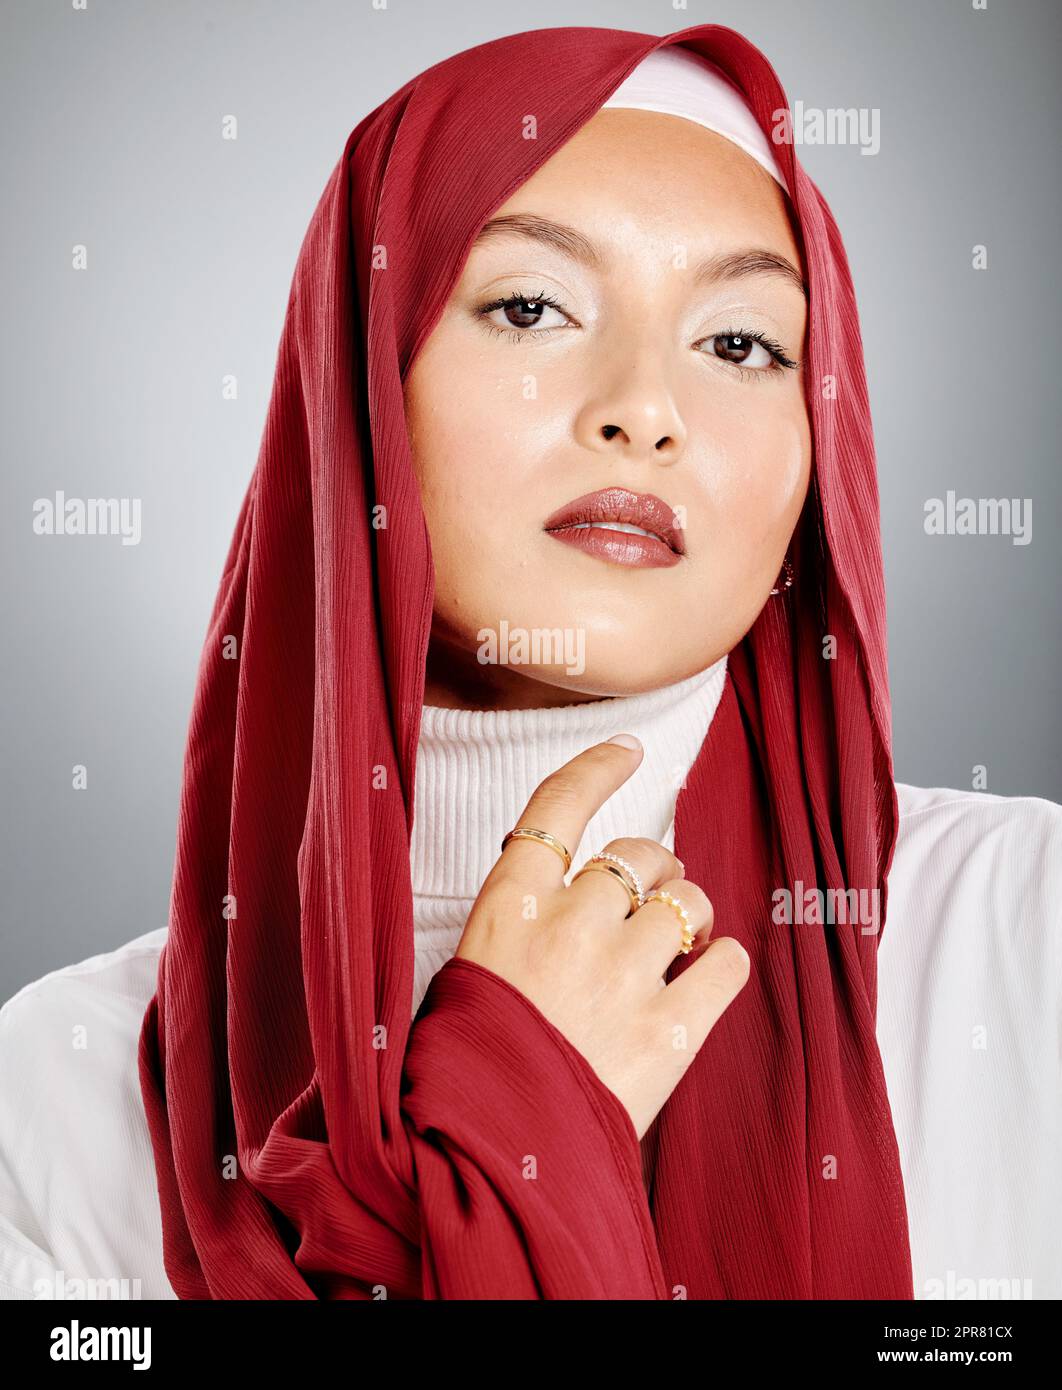 Portrait of a Muslim woman wearing a red hijab or headscarf showing her eyelash extensions and makeup. Showing her flawless skin glowing. Beautiful woman isolated against a grey studio background. Stock Photo